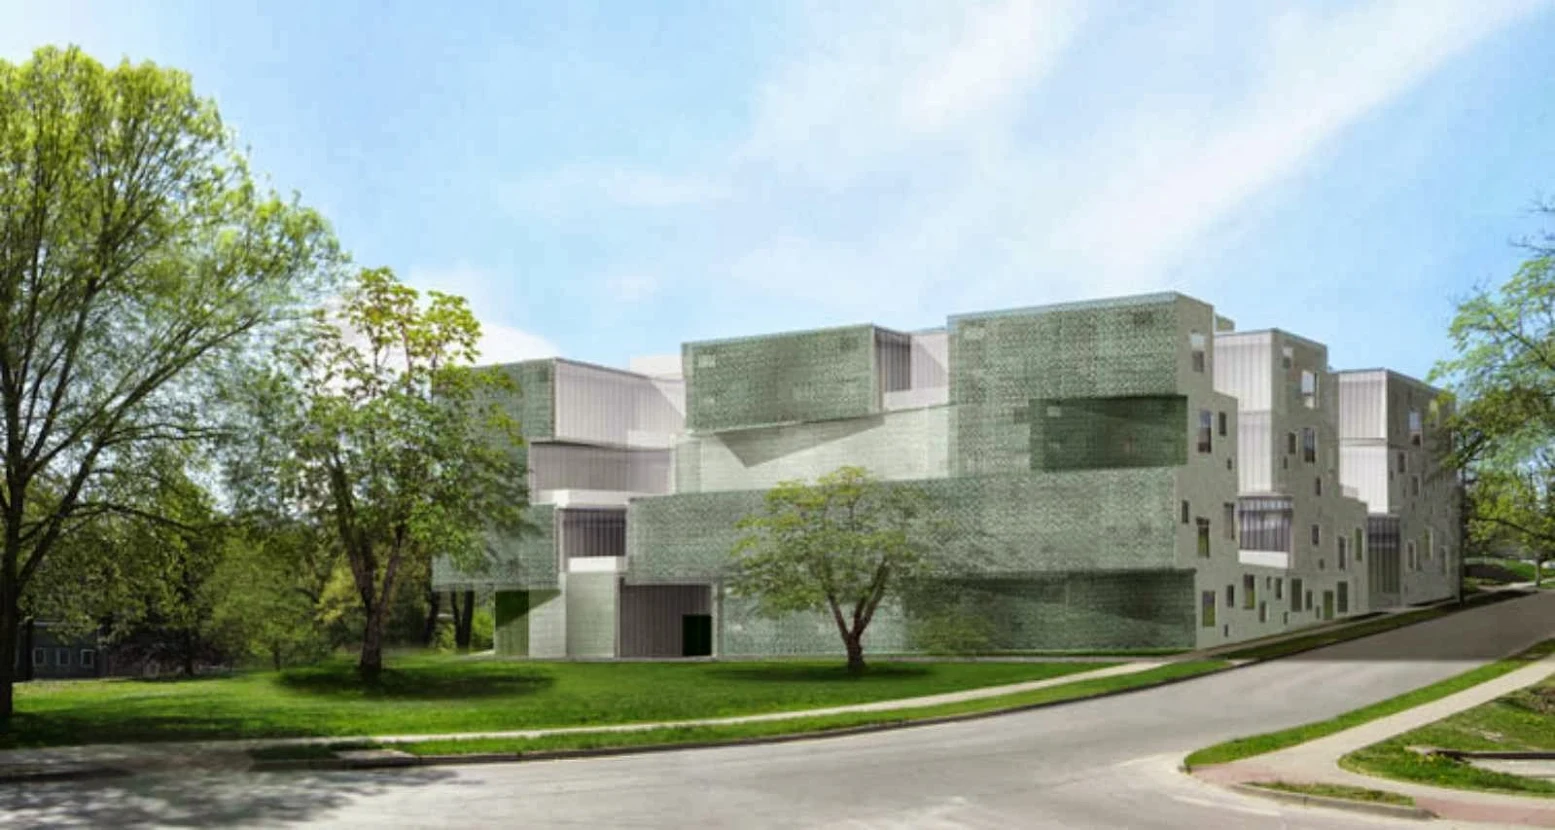 Visual Arts Building by Steven Holl